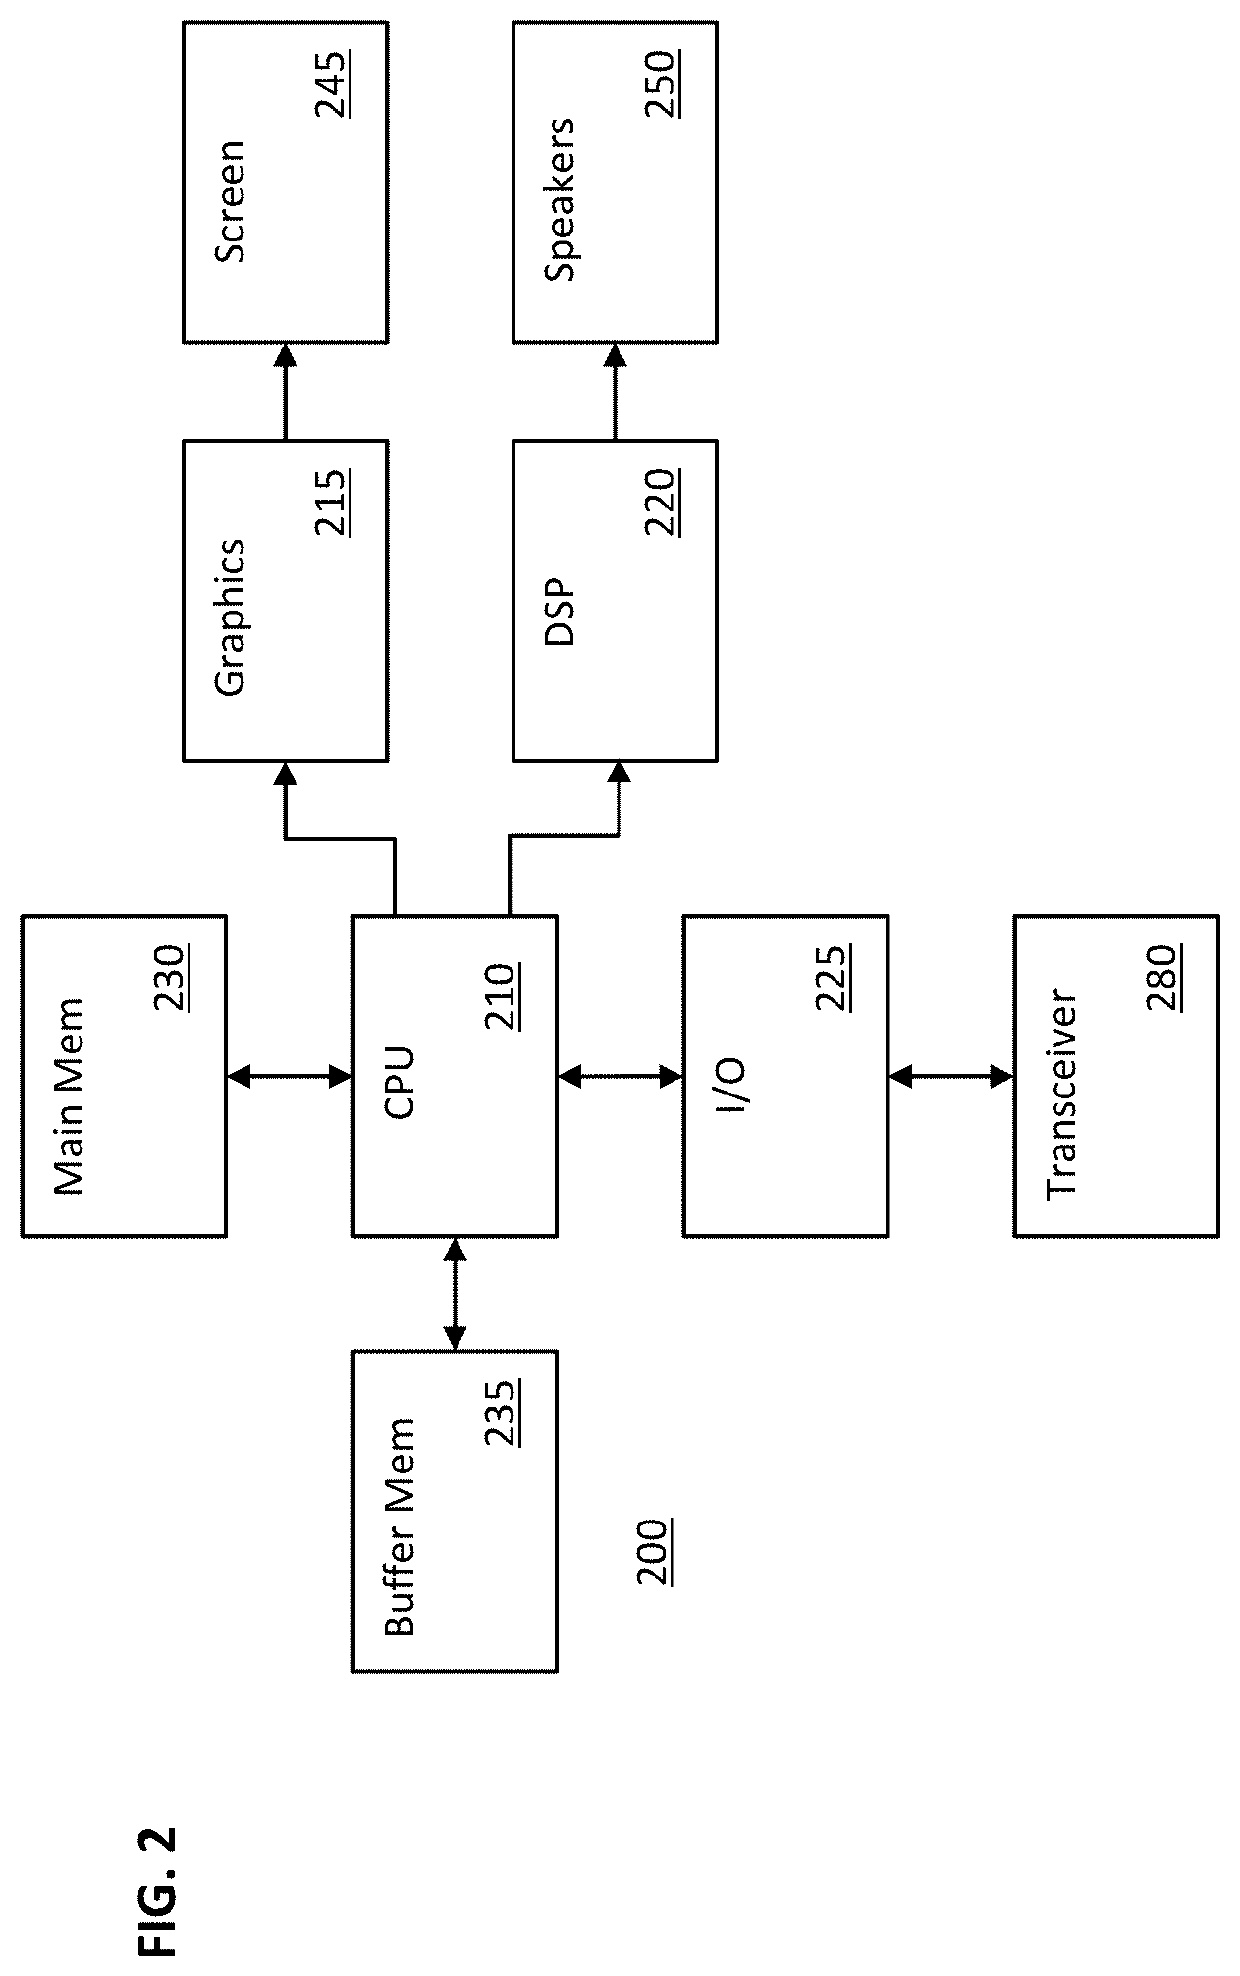 Game system with game machine executing a game program that receives inputs and outputs control signals to a game controller